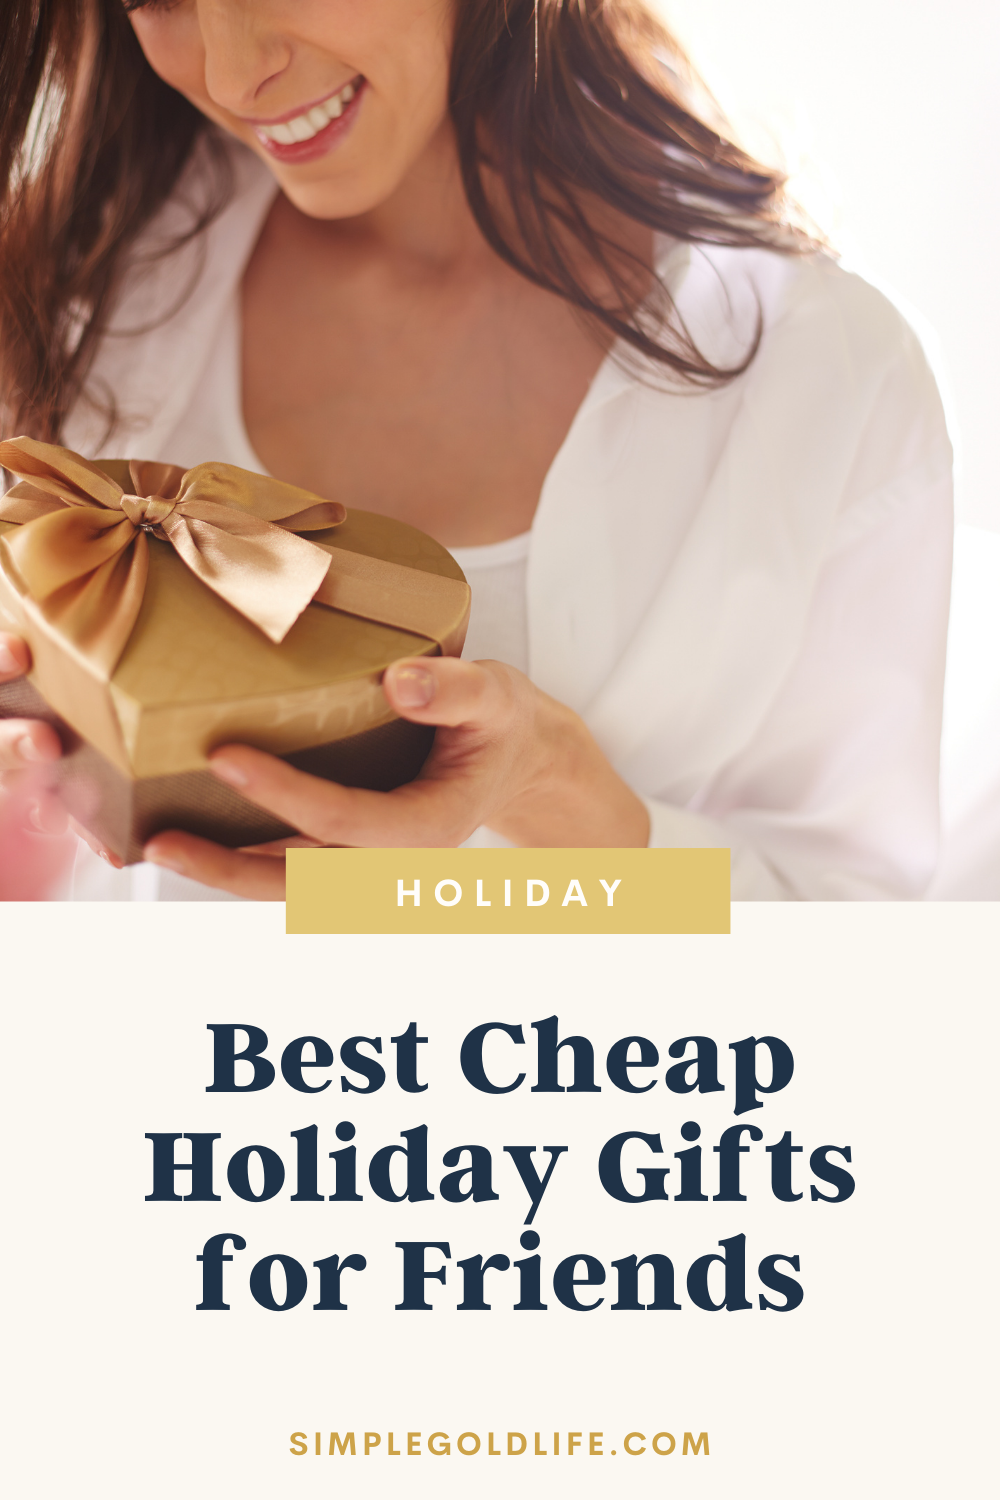  Best Budget Friendly Holiday Gift Ideas for Adults! Your mom, best friend, and family will love them!  